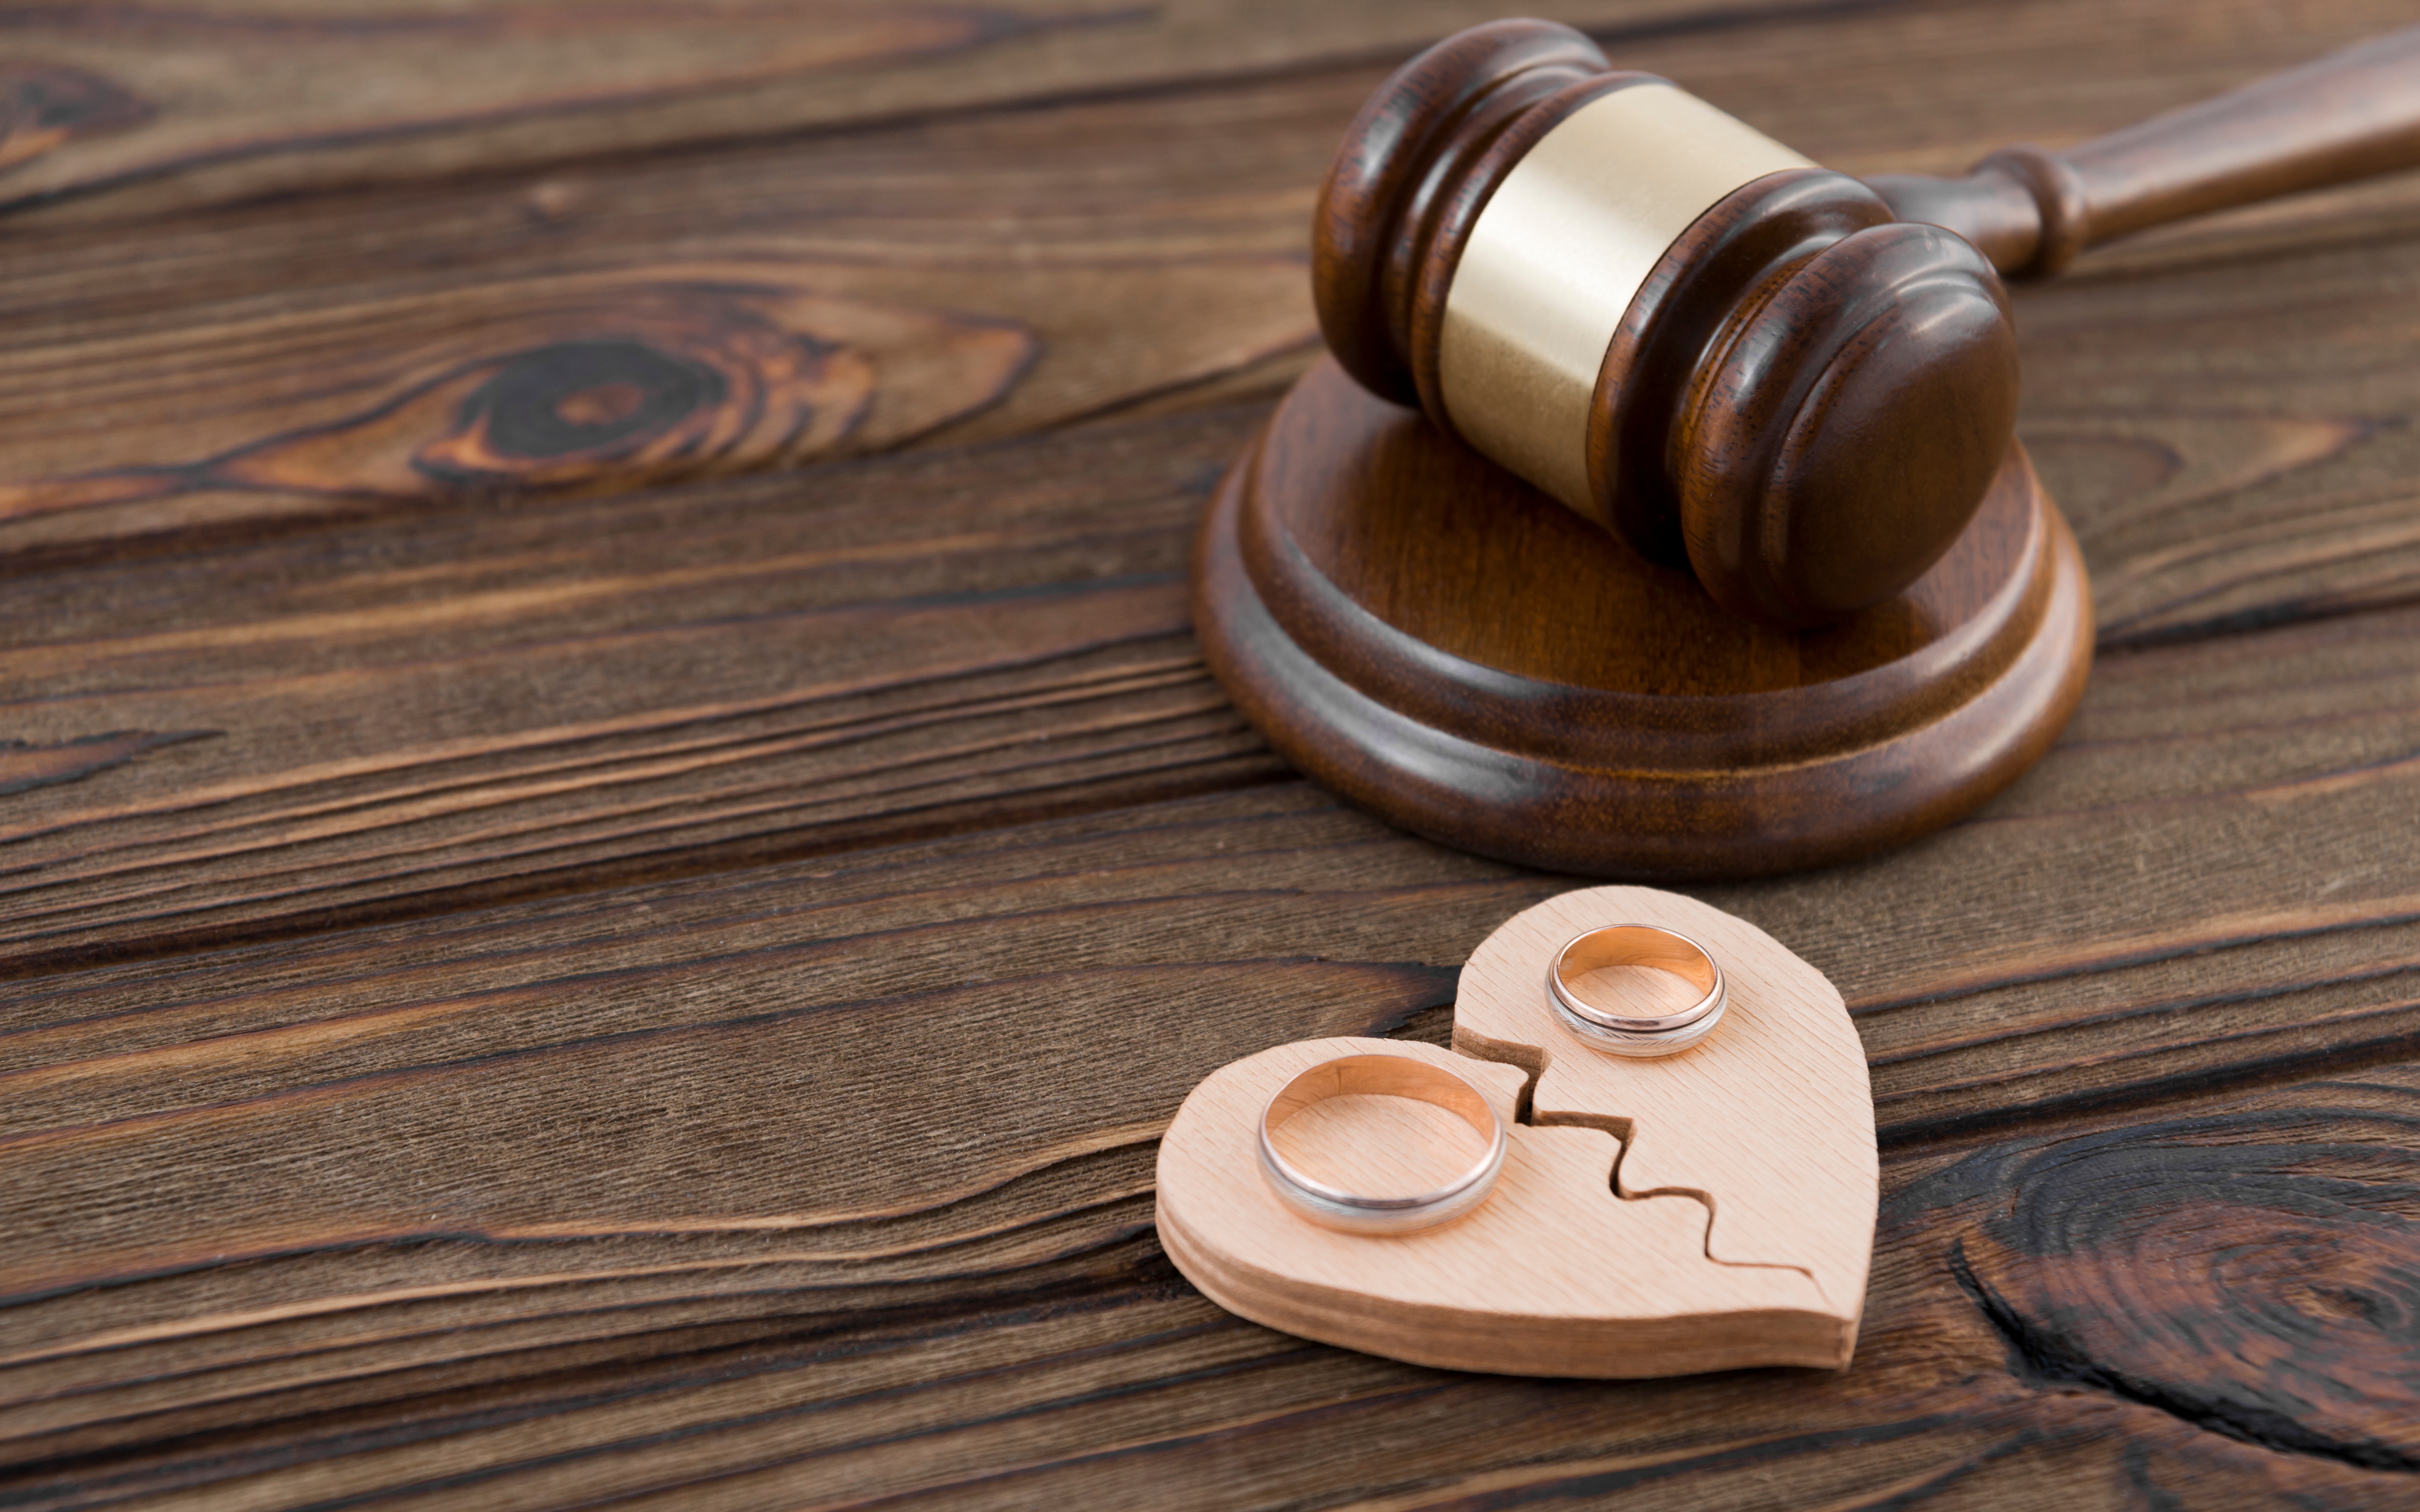 Two wedding rings and judge's gavel | Source: Shutterstock